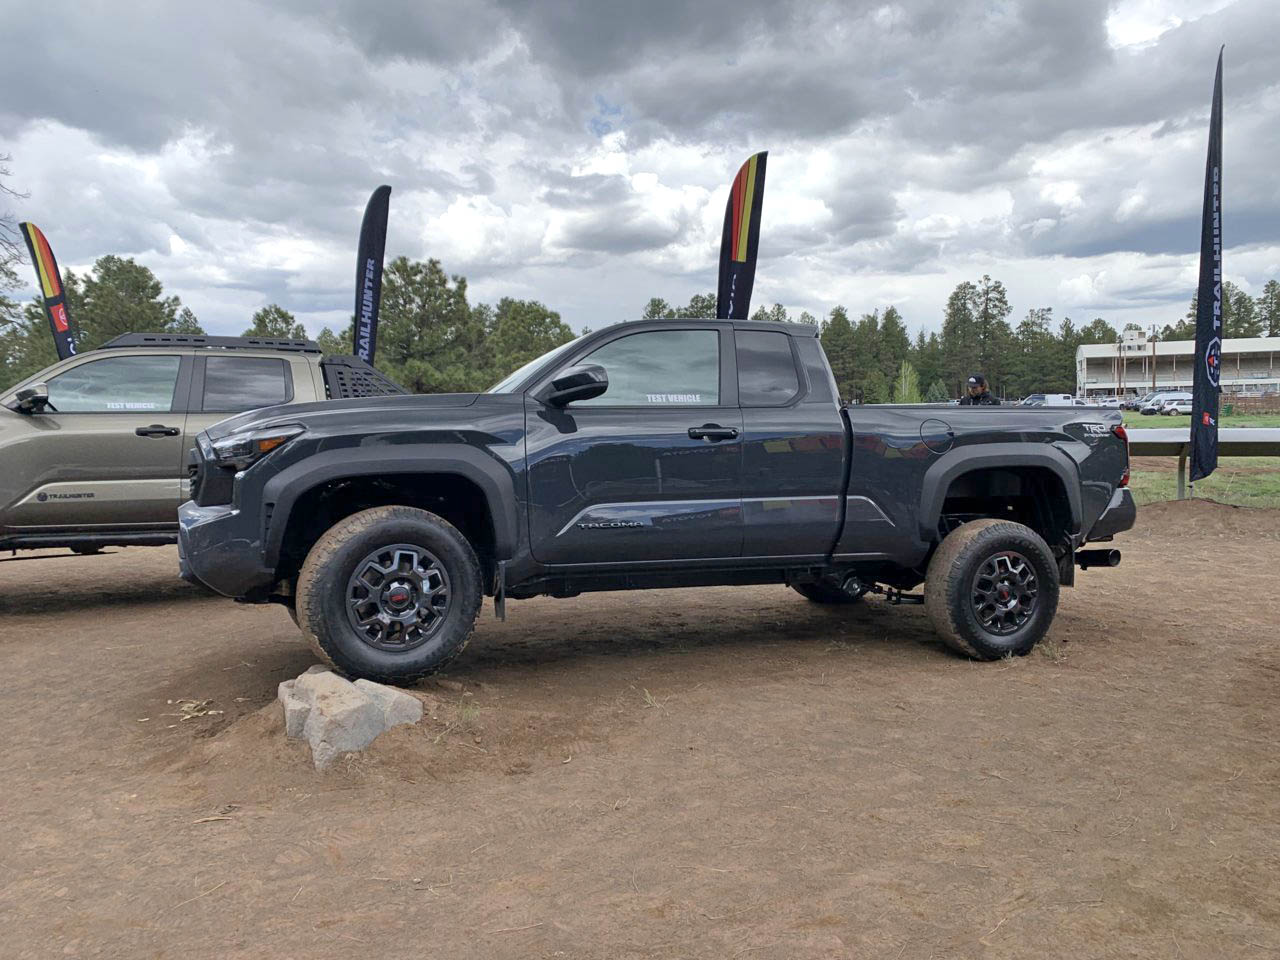 2024 Tacoma 2024 Tacoma Trailhunter (+ undercarriage / underbody) and PreRunner at Overland Expo 2023 -- first public photos & impressions from 3rd gen owner 2024 Tacoma PreRunner Overland Expo real life photo